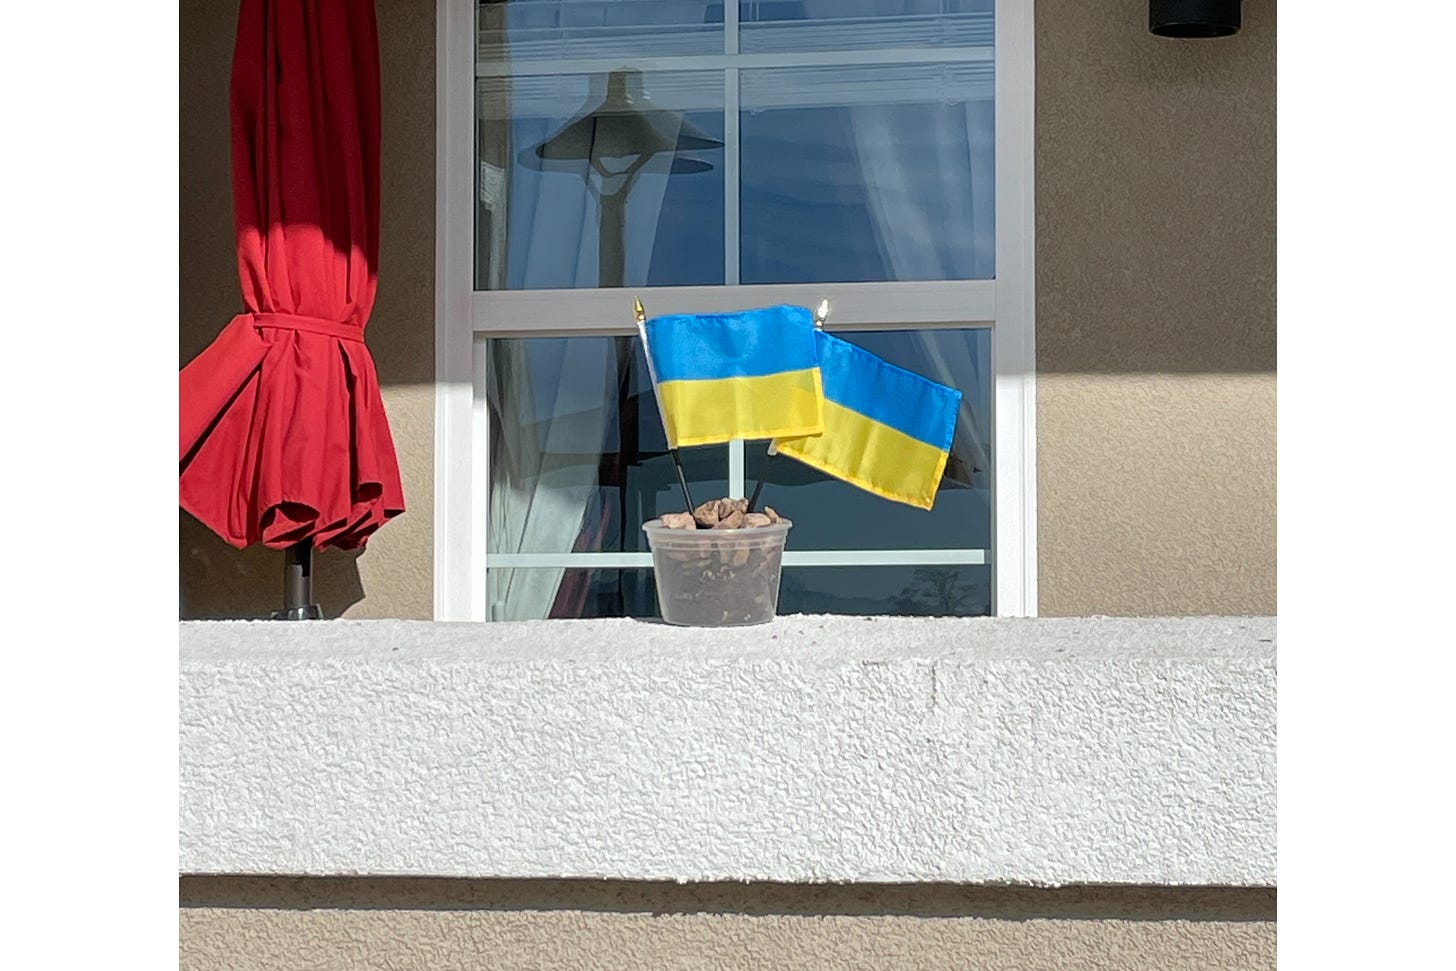 two small ukrainian flags in a container on a porch